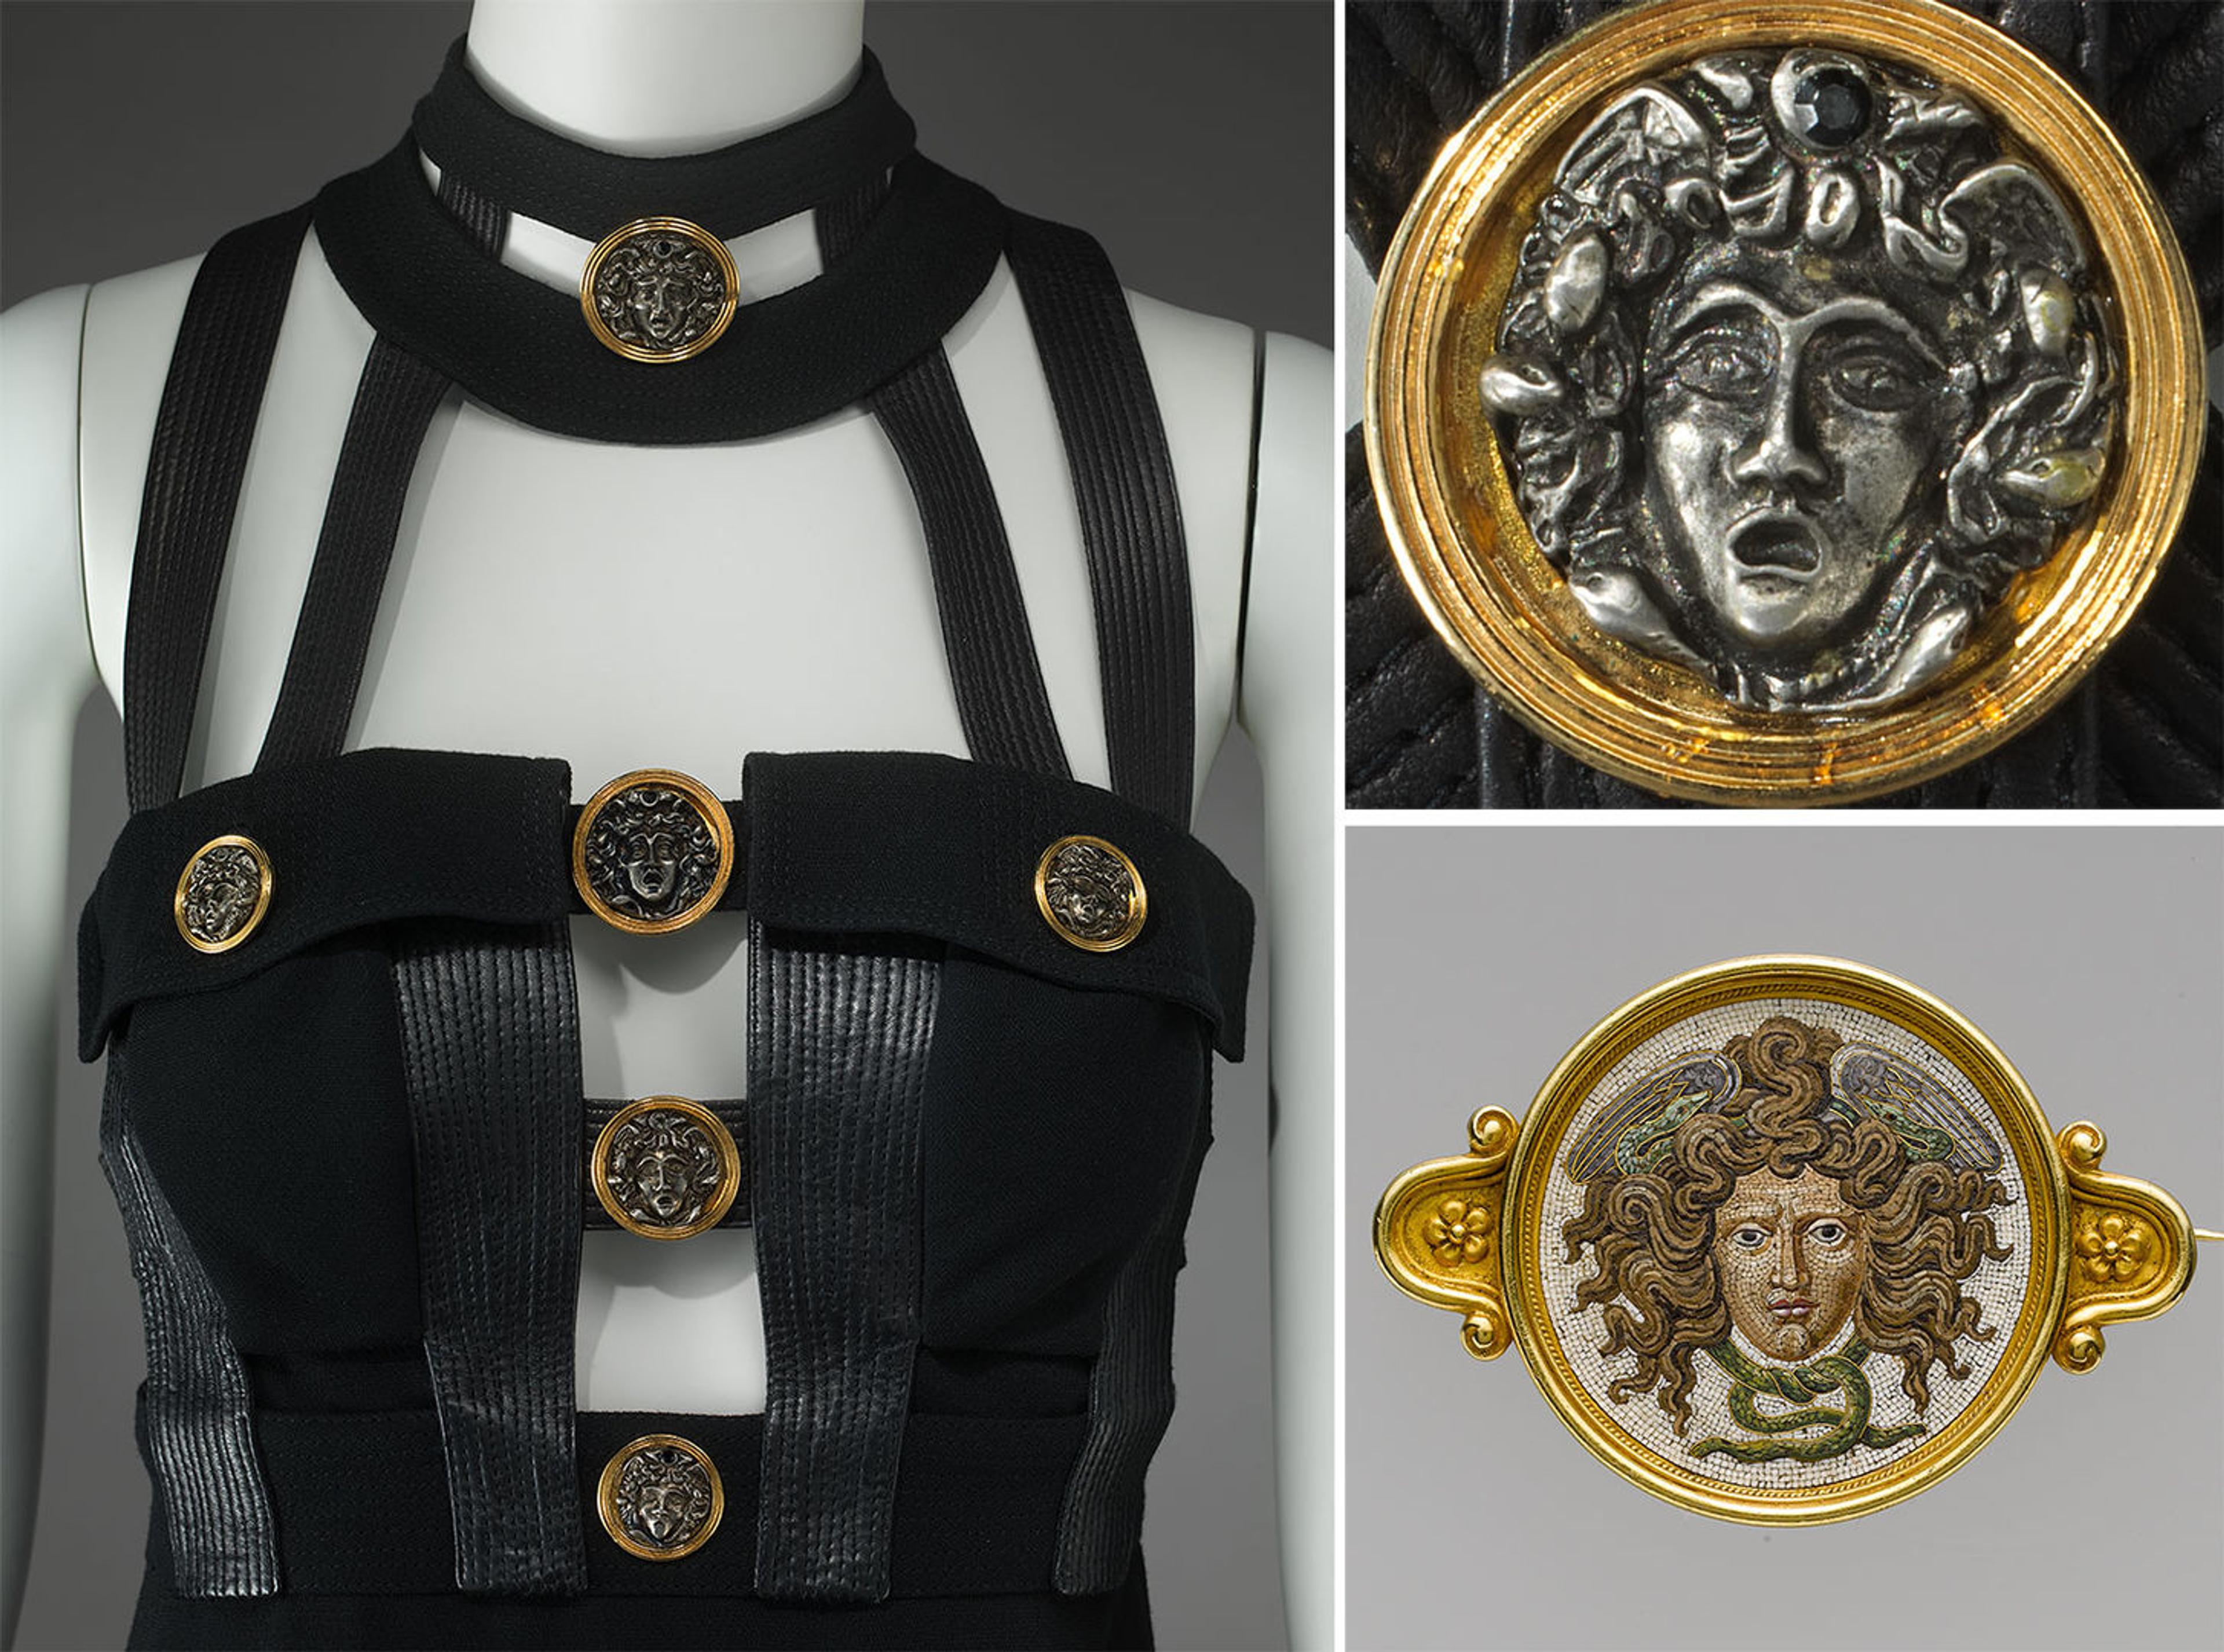 Three images showing Versace dress with Medusa medallions and a Baroque brooch with head of Medusa